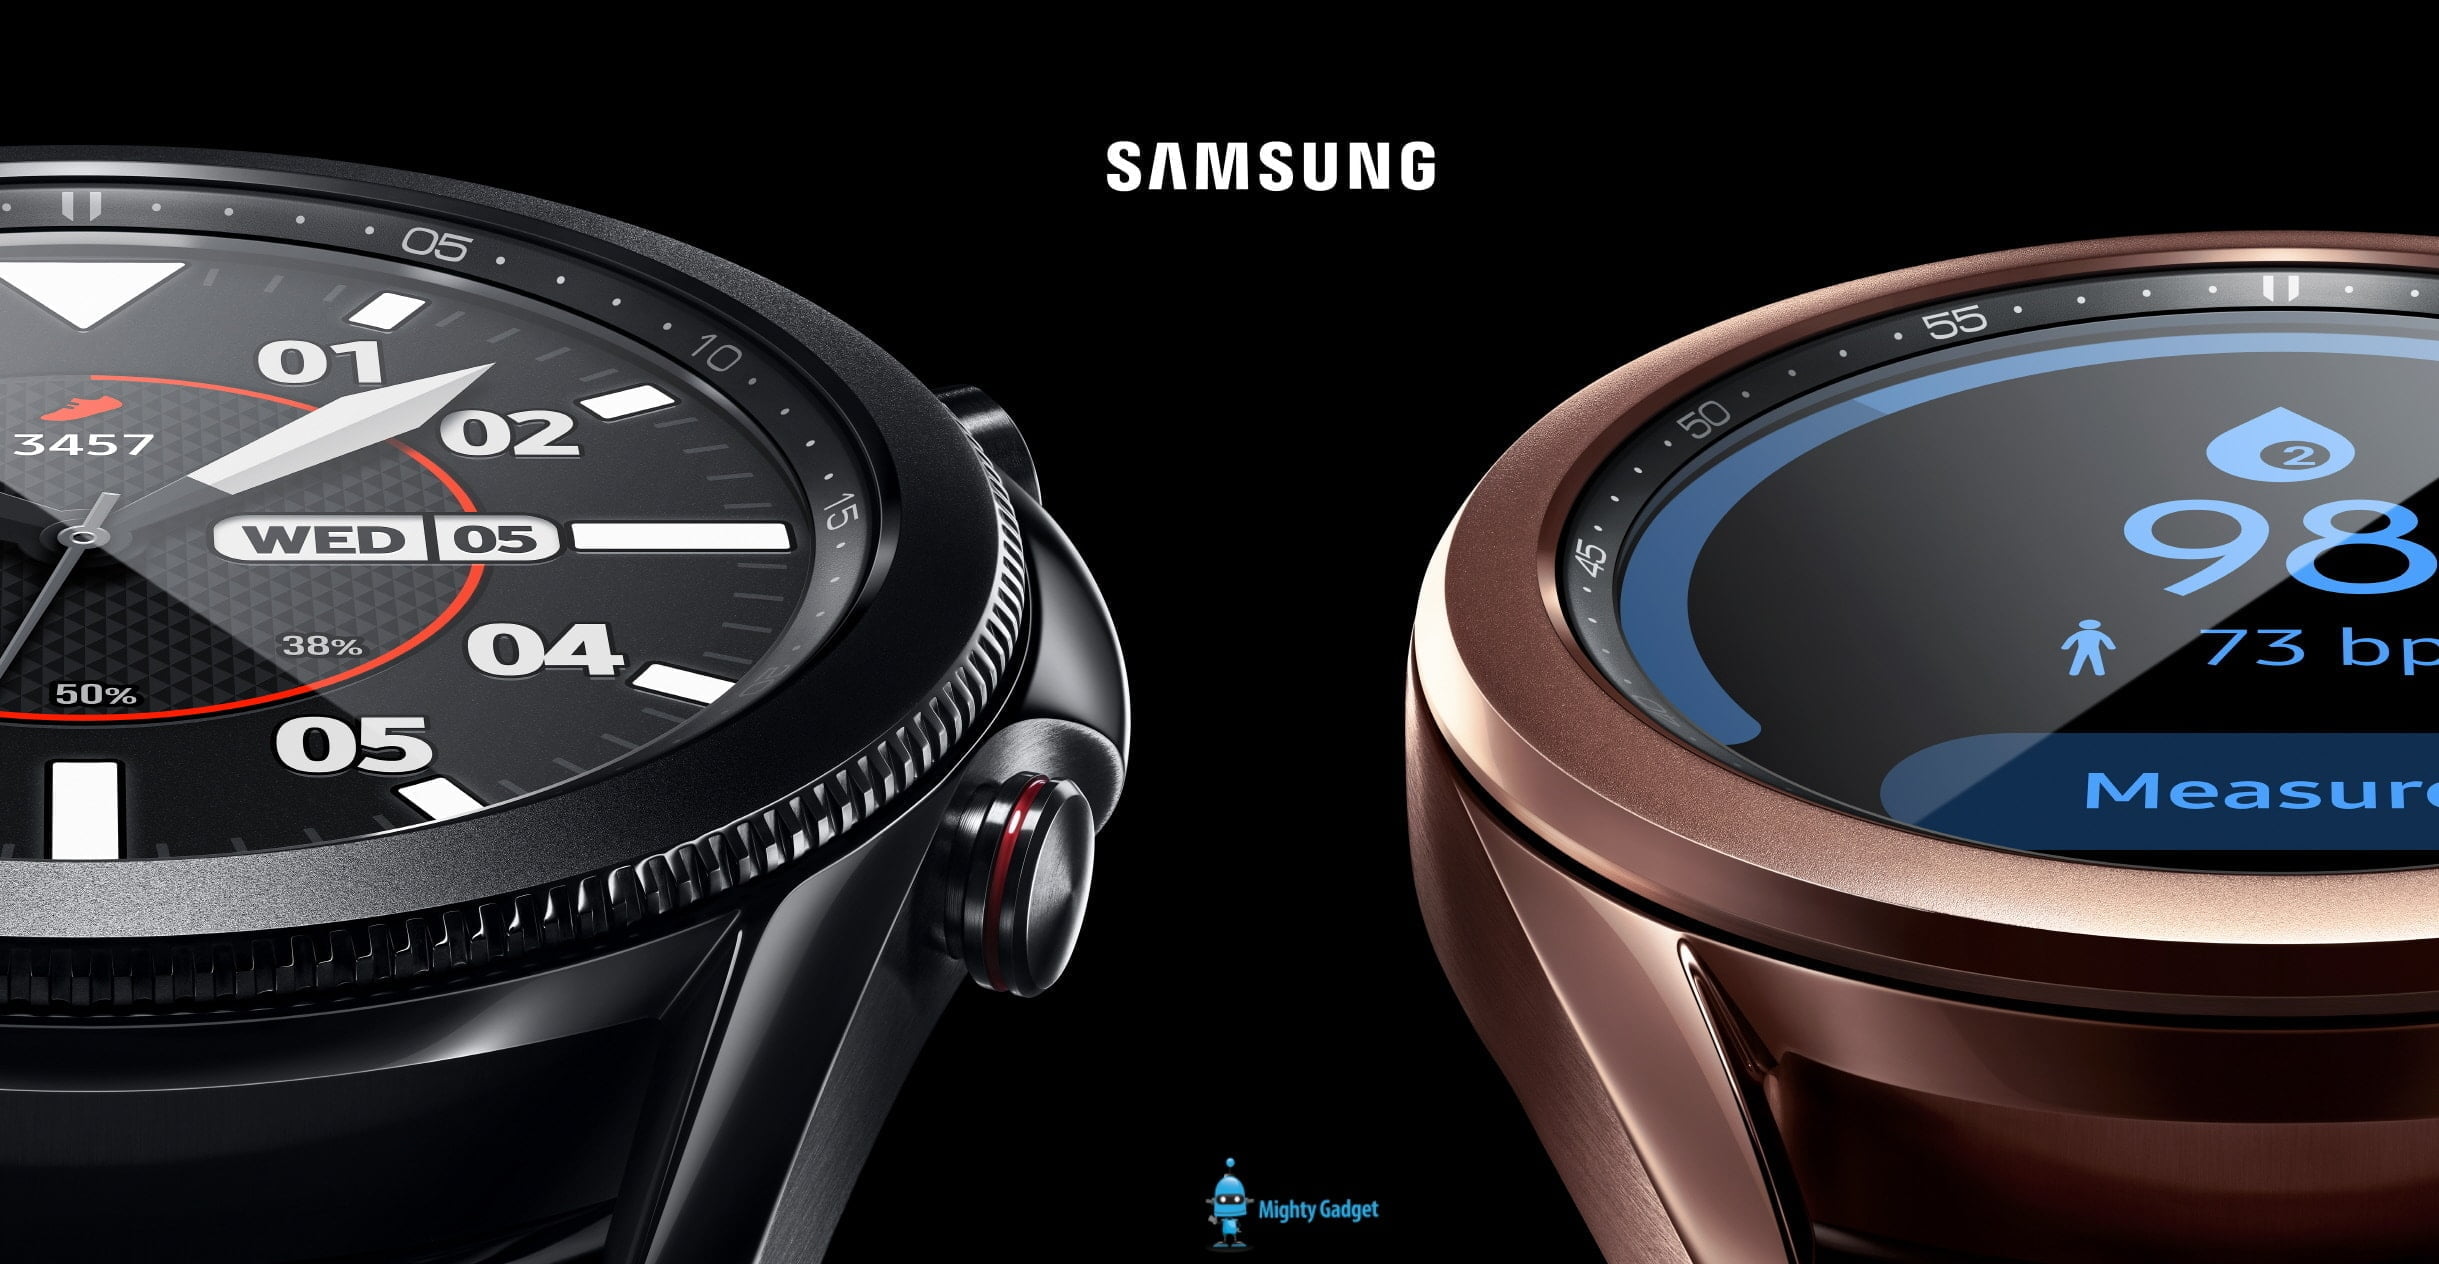 Samsung Exynos W920 vs Exynos 9110 vs Qualcomm Wear 4100 Specifications Compared – The new Galaxy Watch4 chipset could make this the best Wear OS watch yet